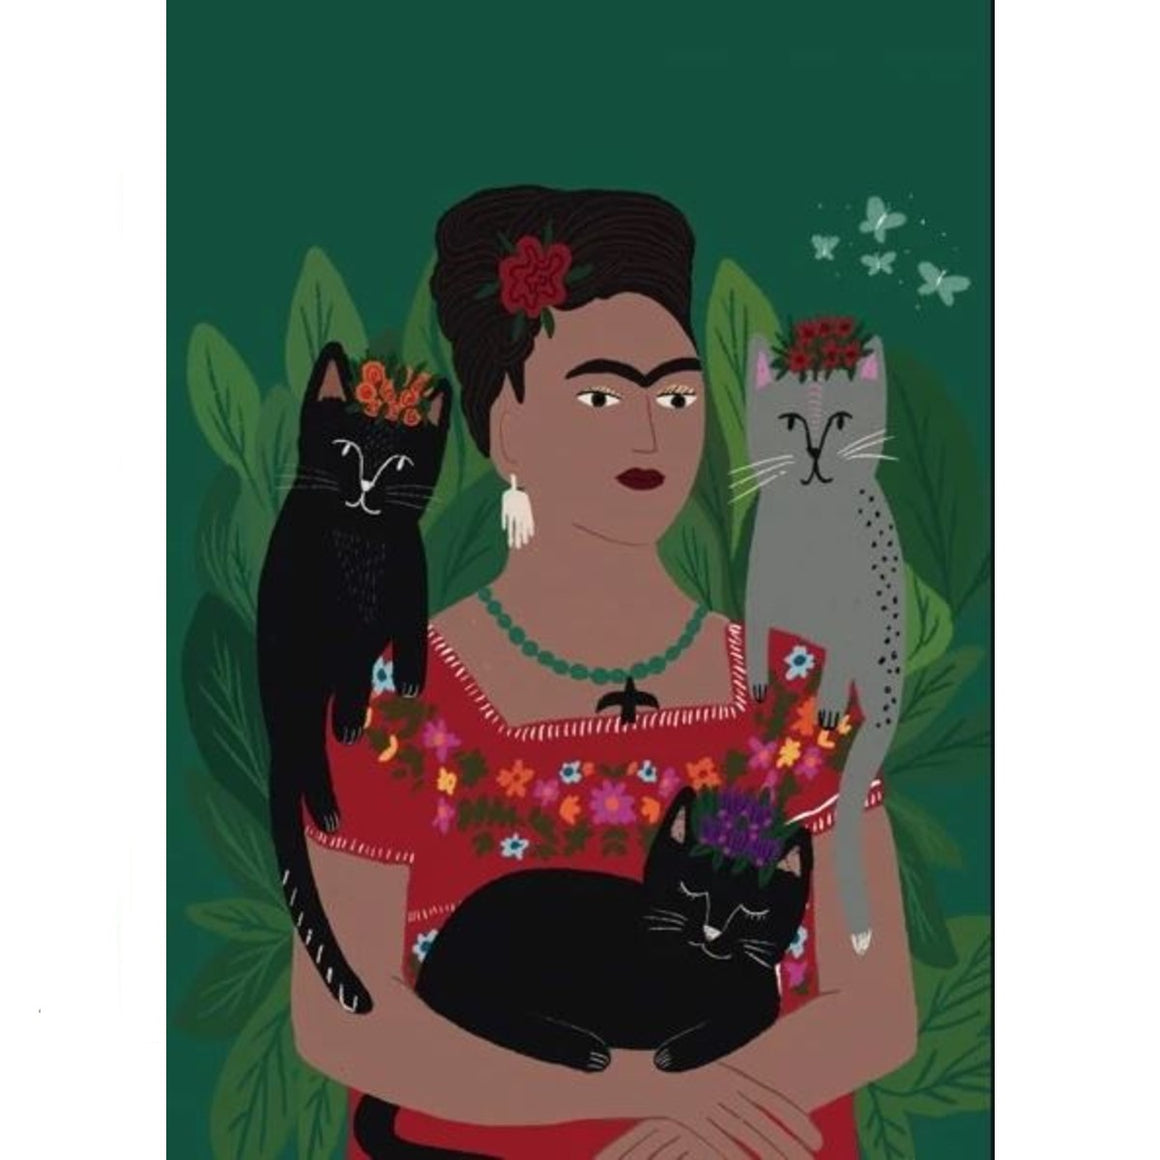 Image of a card print in the center which includes a graphic portrait of frida kahlo who is surrounded by cats and leaves 